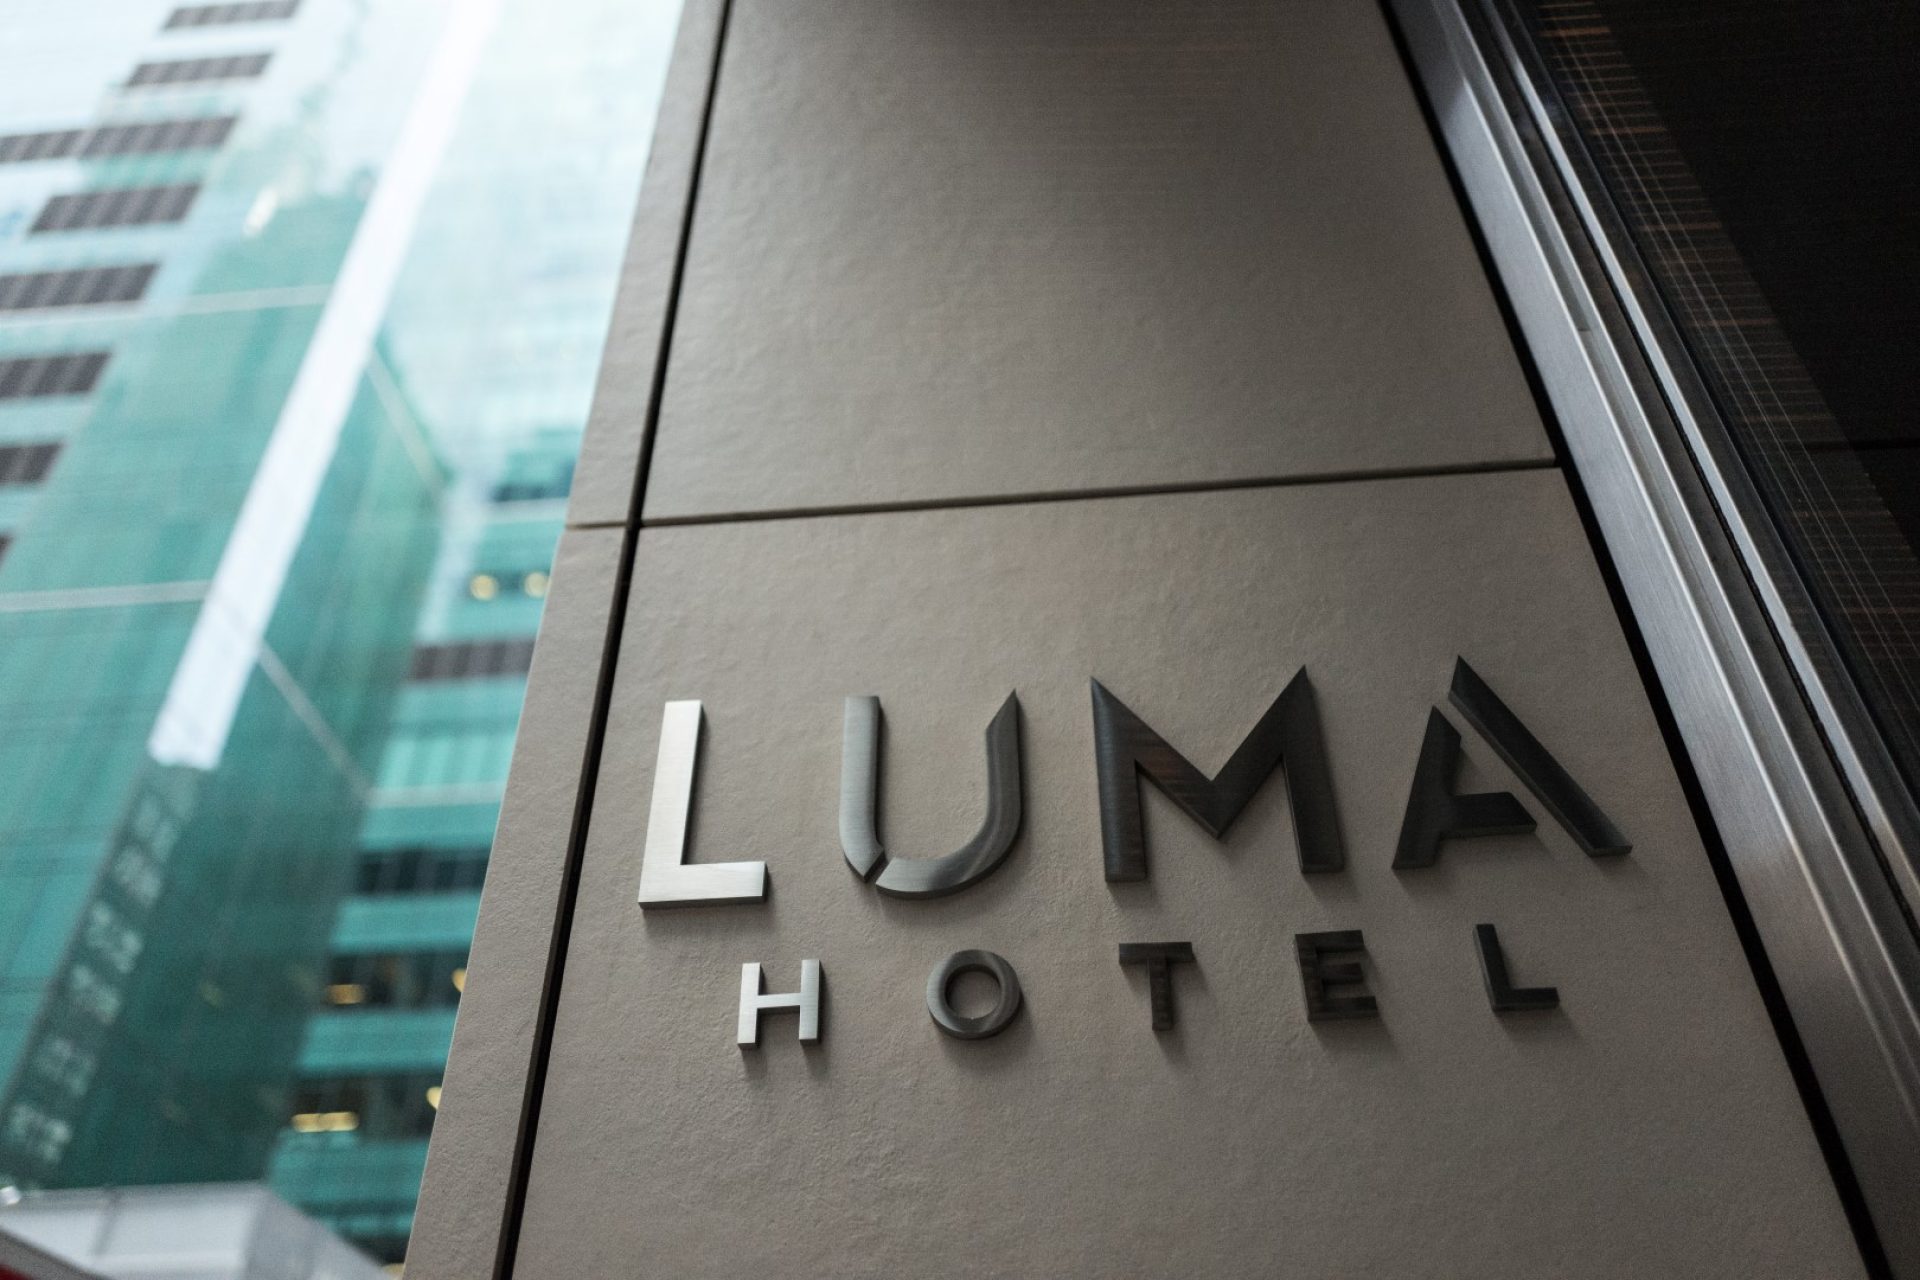 LUMA is a newly built hotel located between two pre-war buildings on 41st Street between Broadway and Avenue of the Americas